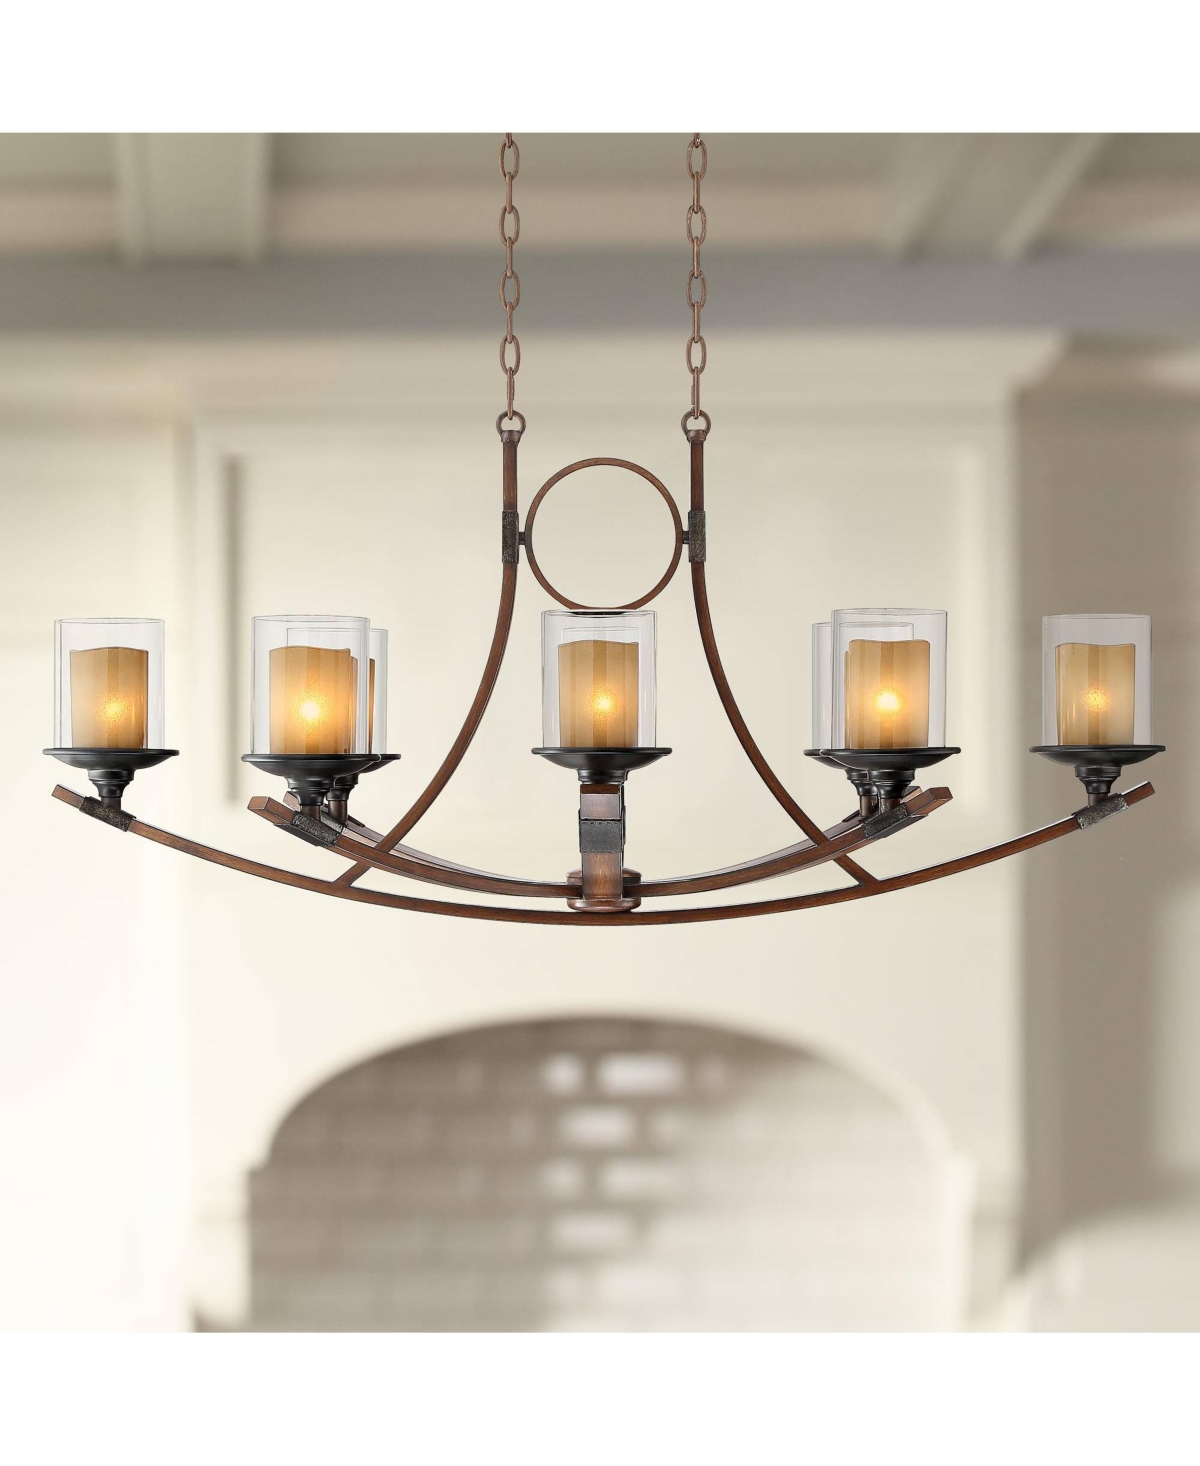 Franklin Iron Works Tafford Mahogany Wood Finish Large Linear Island Pendant Chandelier 43 1/4" Wide Rustic Clear Outer In Brown